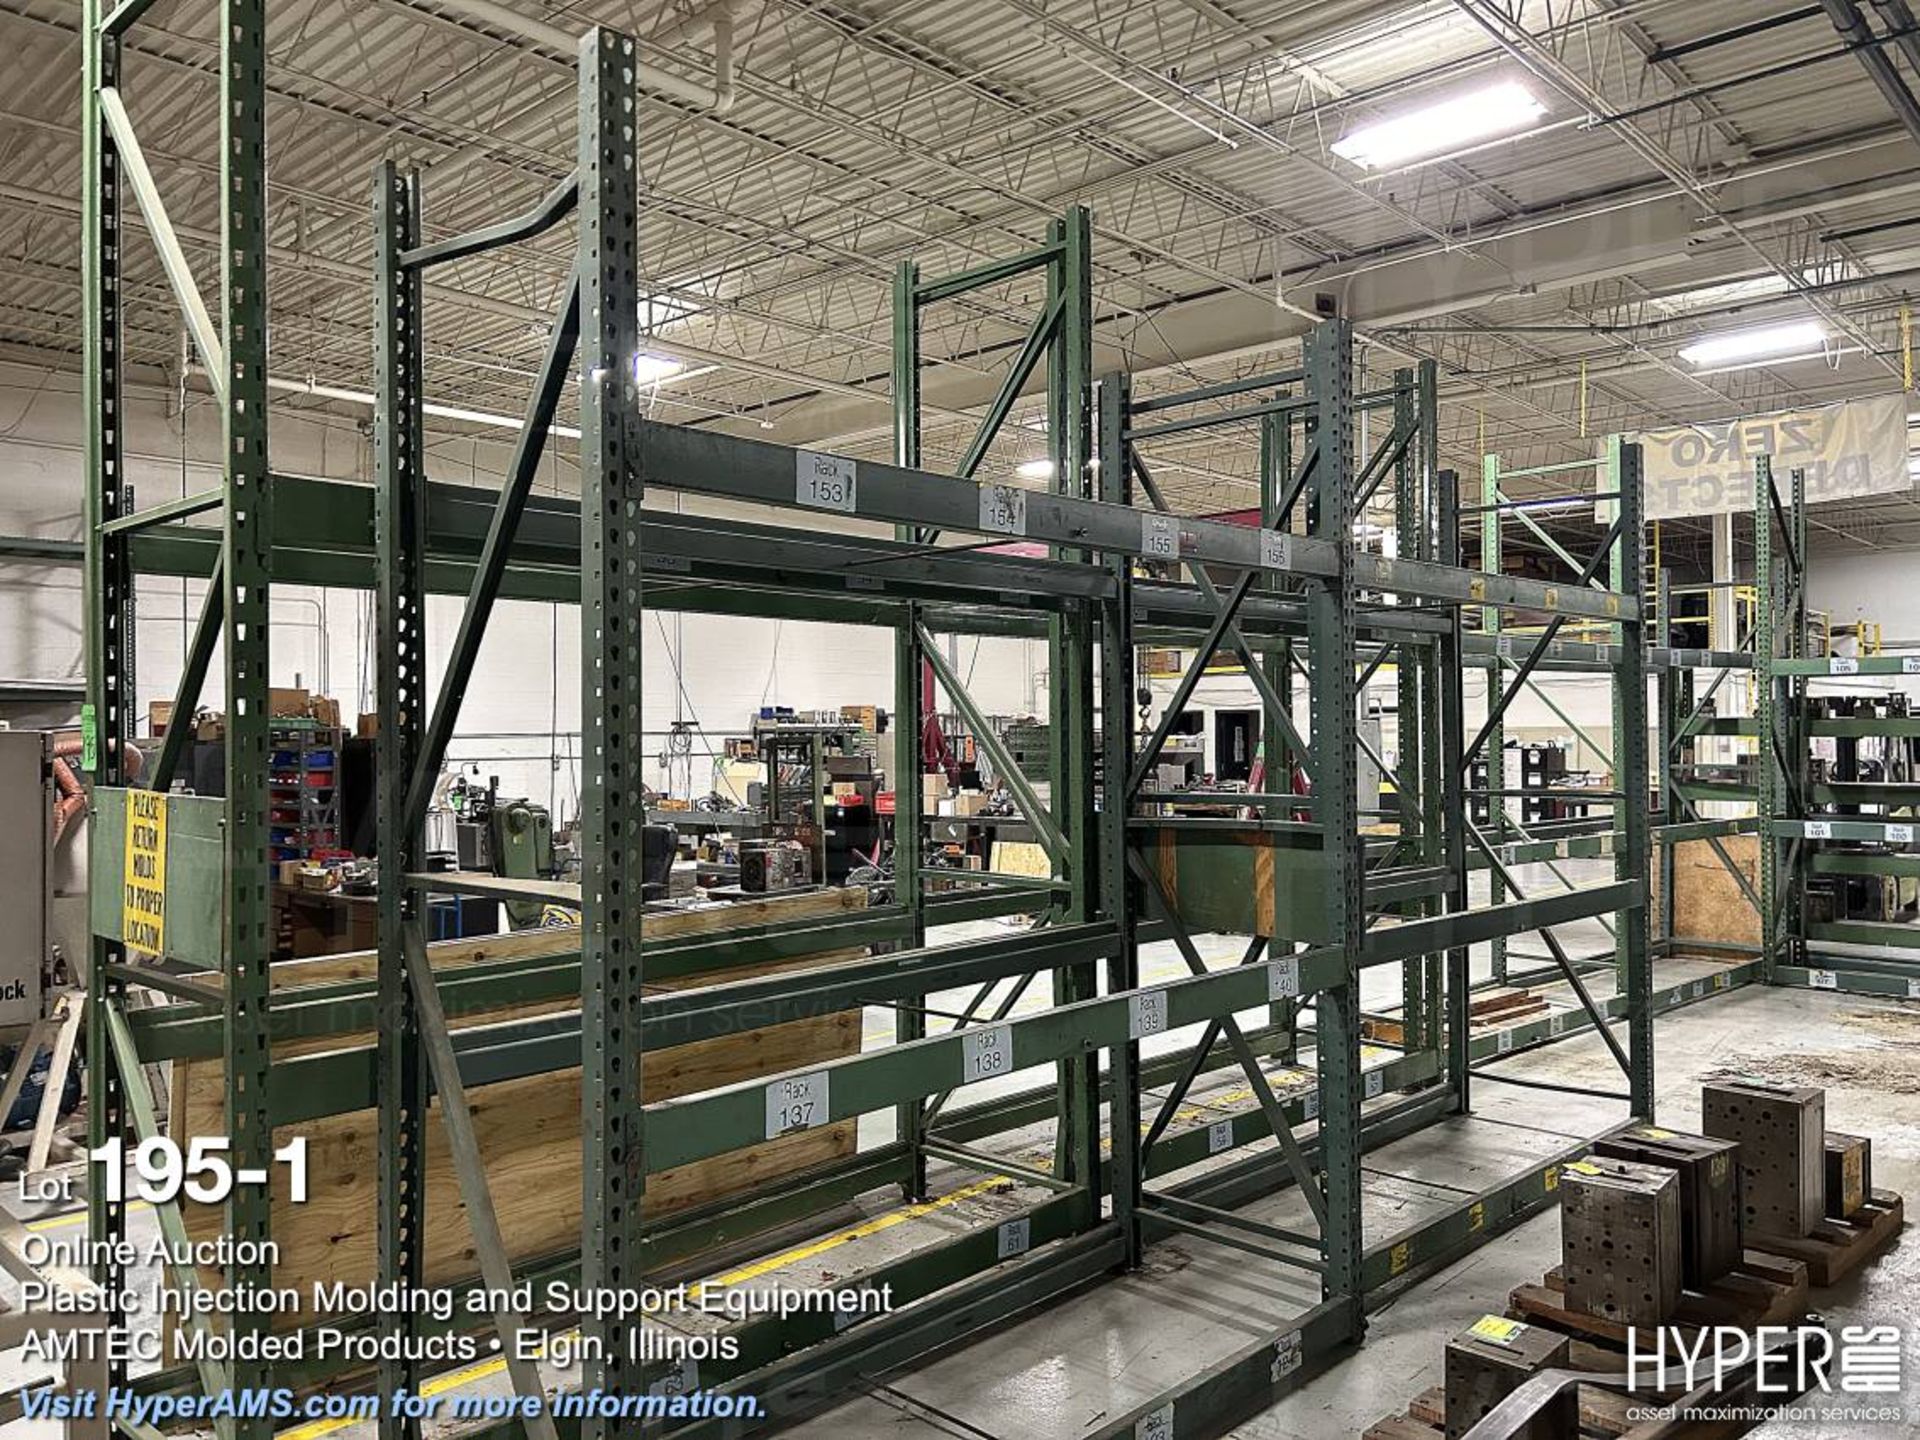 (6) Section pallet racking